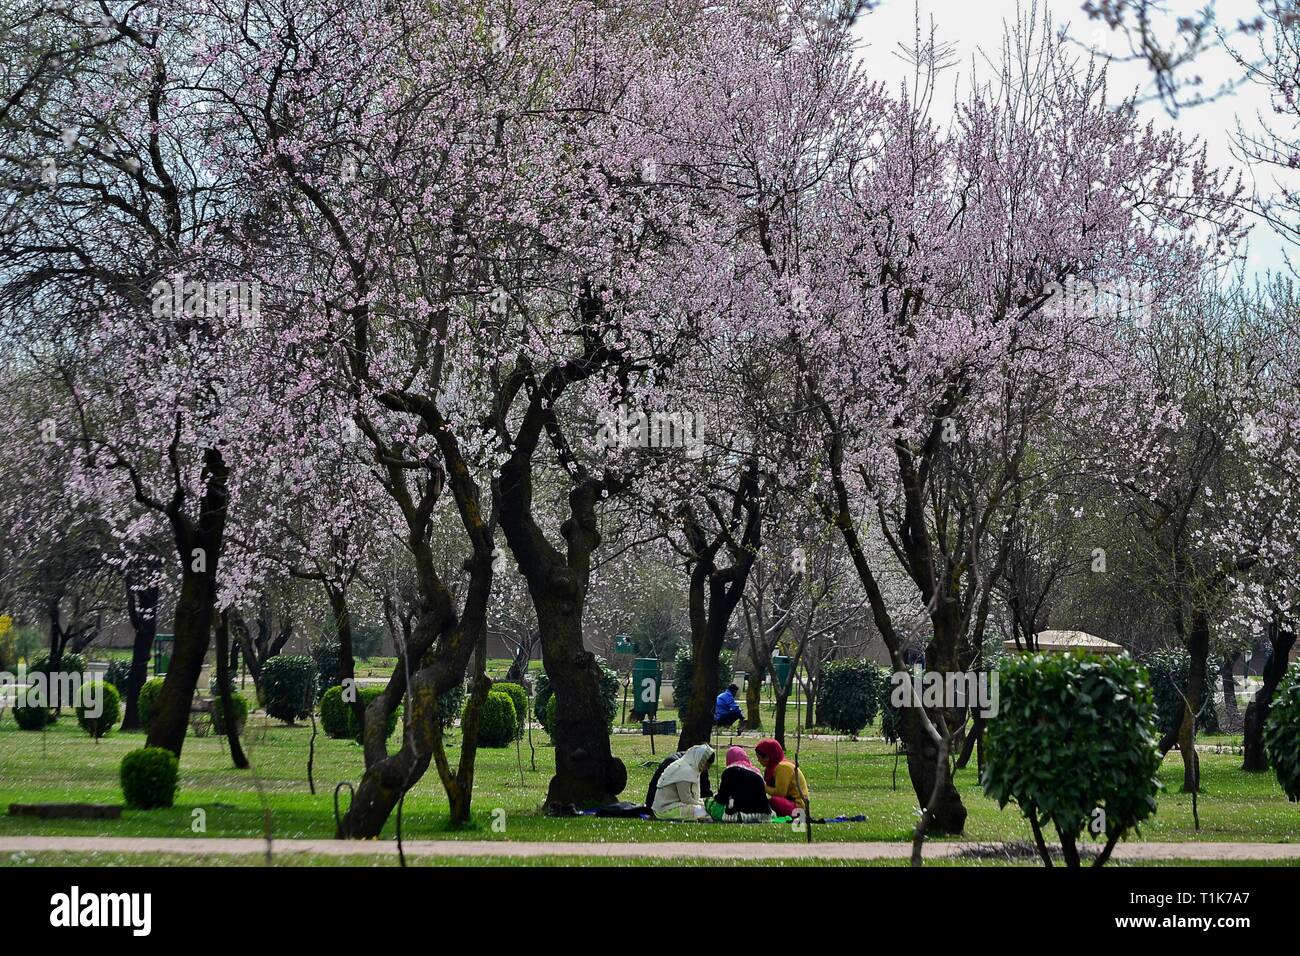 March 27, 2019 - Srinagar, J&K, India - Visitors are seen relaxing at the Badam Vaer ( Almond garden) on a sunny spring day in Srinagar, Kashmir. Spring has arrived in Kashmir valley, which marks a thawing of the lean season for tourism in the Himalayan region. Credit: Saqib Majeed/SOPA Images/ZUMA Wire/Alamy Live News Stock Photo